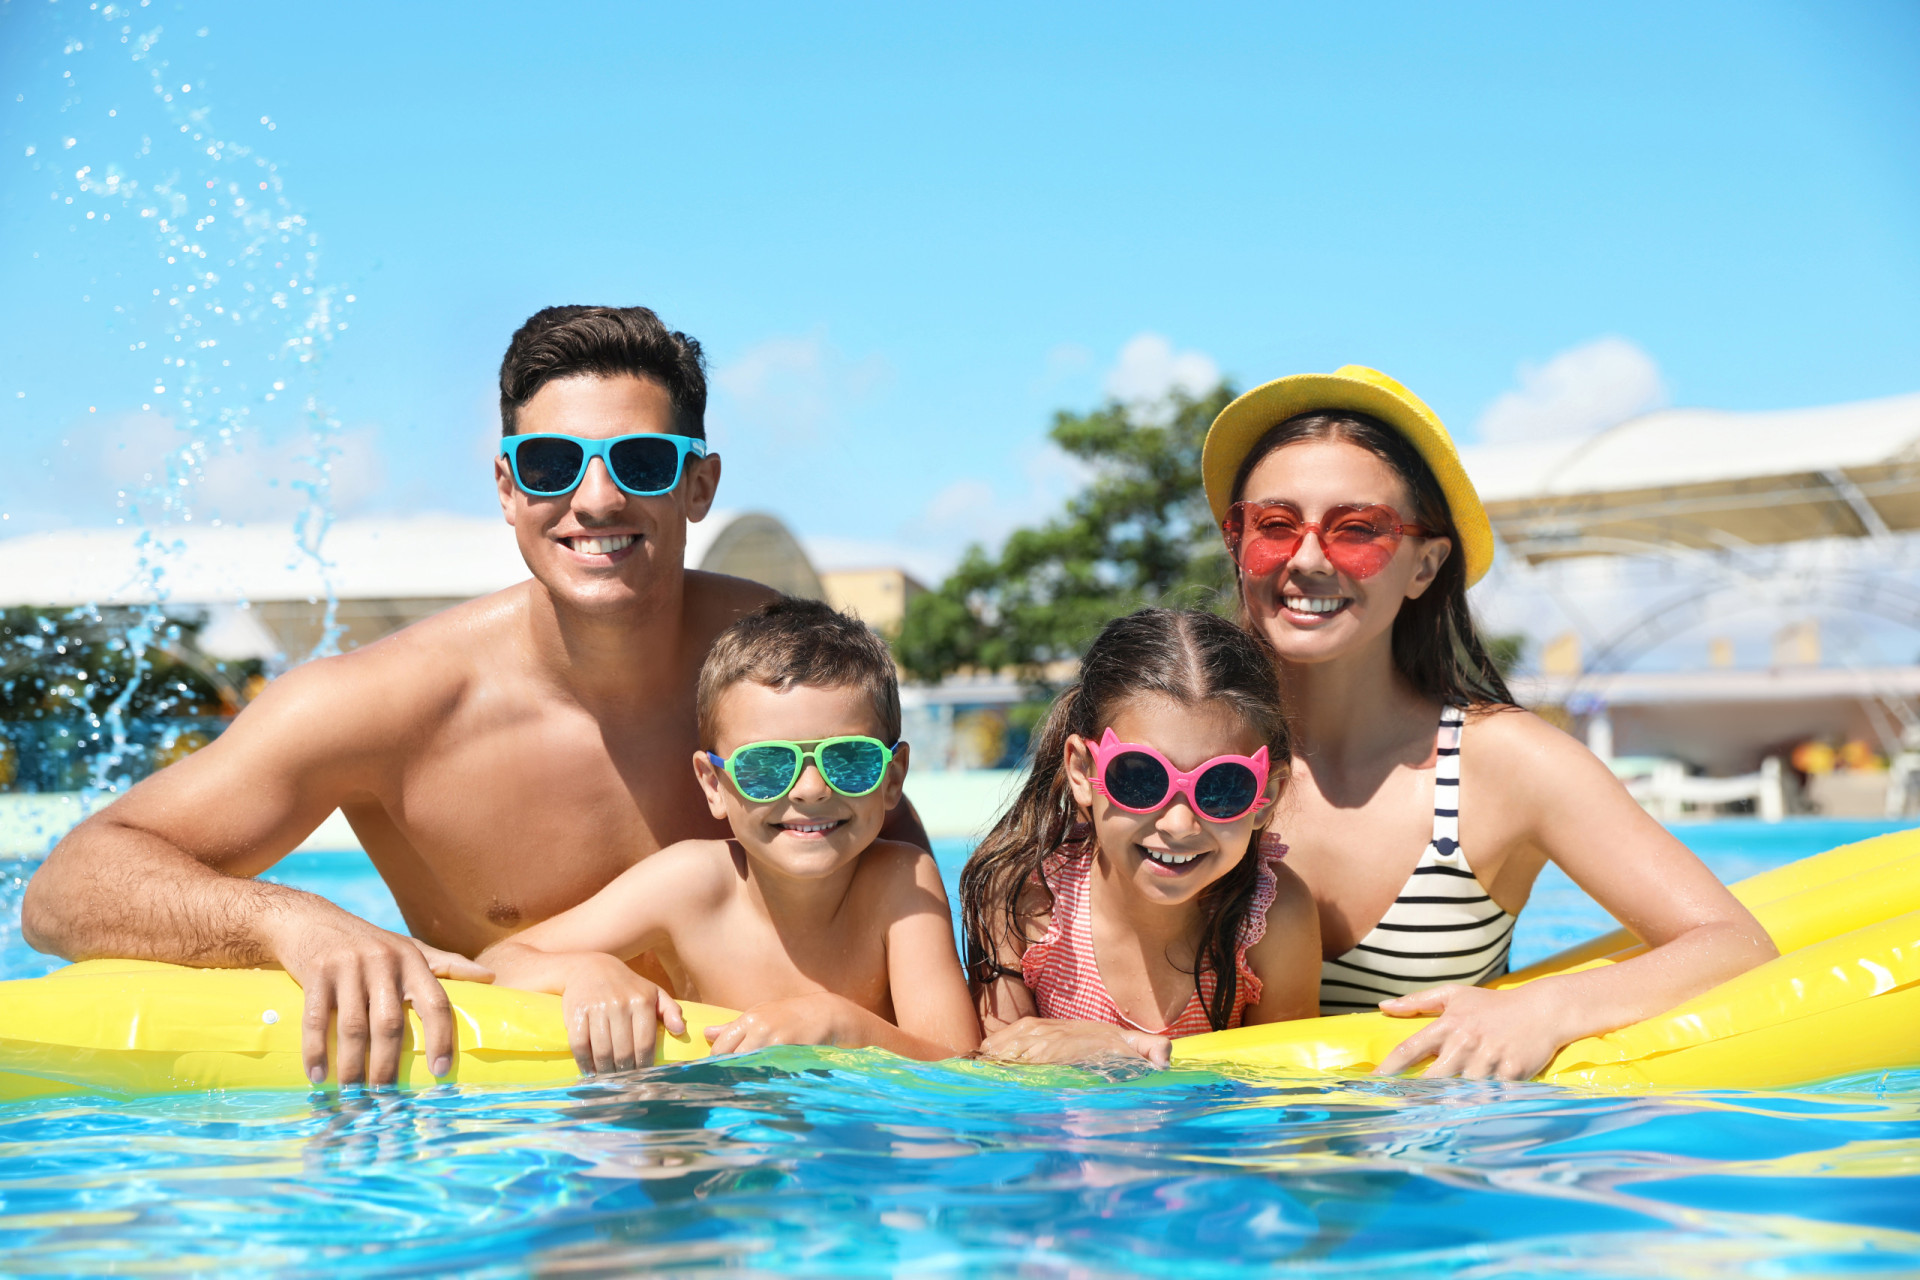 <p>Generally speaking, an all-inclusive resort provides a safe and familiar holiday haven, especially for those with young children. Most resorts of this type are gated off from public access for security reasons.</p><p><a href="https://www.msn.com/en-us/community/channel/vid-7xx8mnucu55yw63we9va2gwr7uihbxwc68fxqp25x6tg4ftibpra?cvid=94631541bc0f4f89bfd59158d696ad7e">Follow us and access great exclusive content every day</a></p>